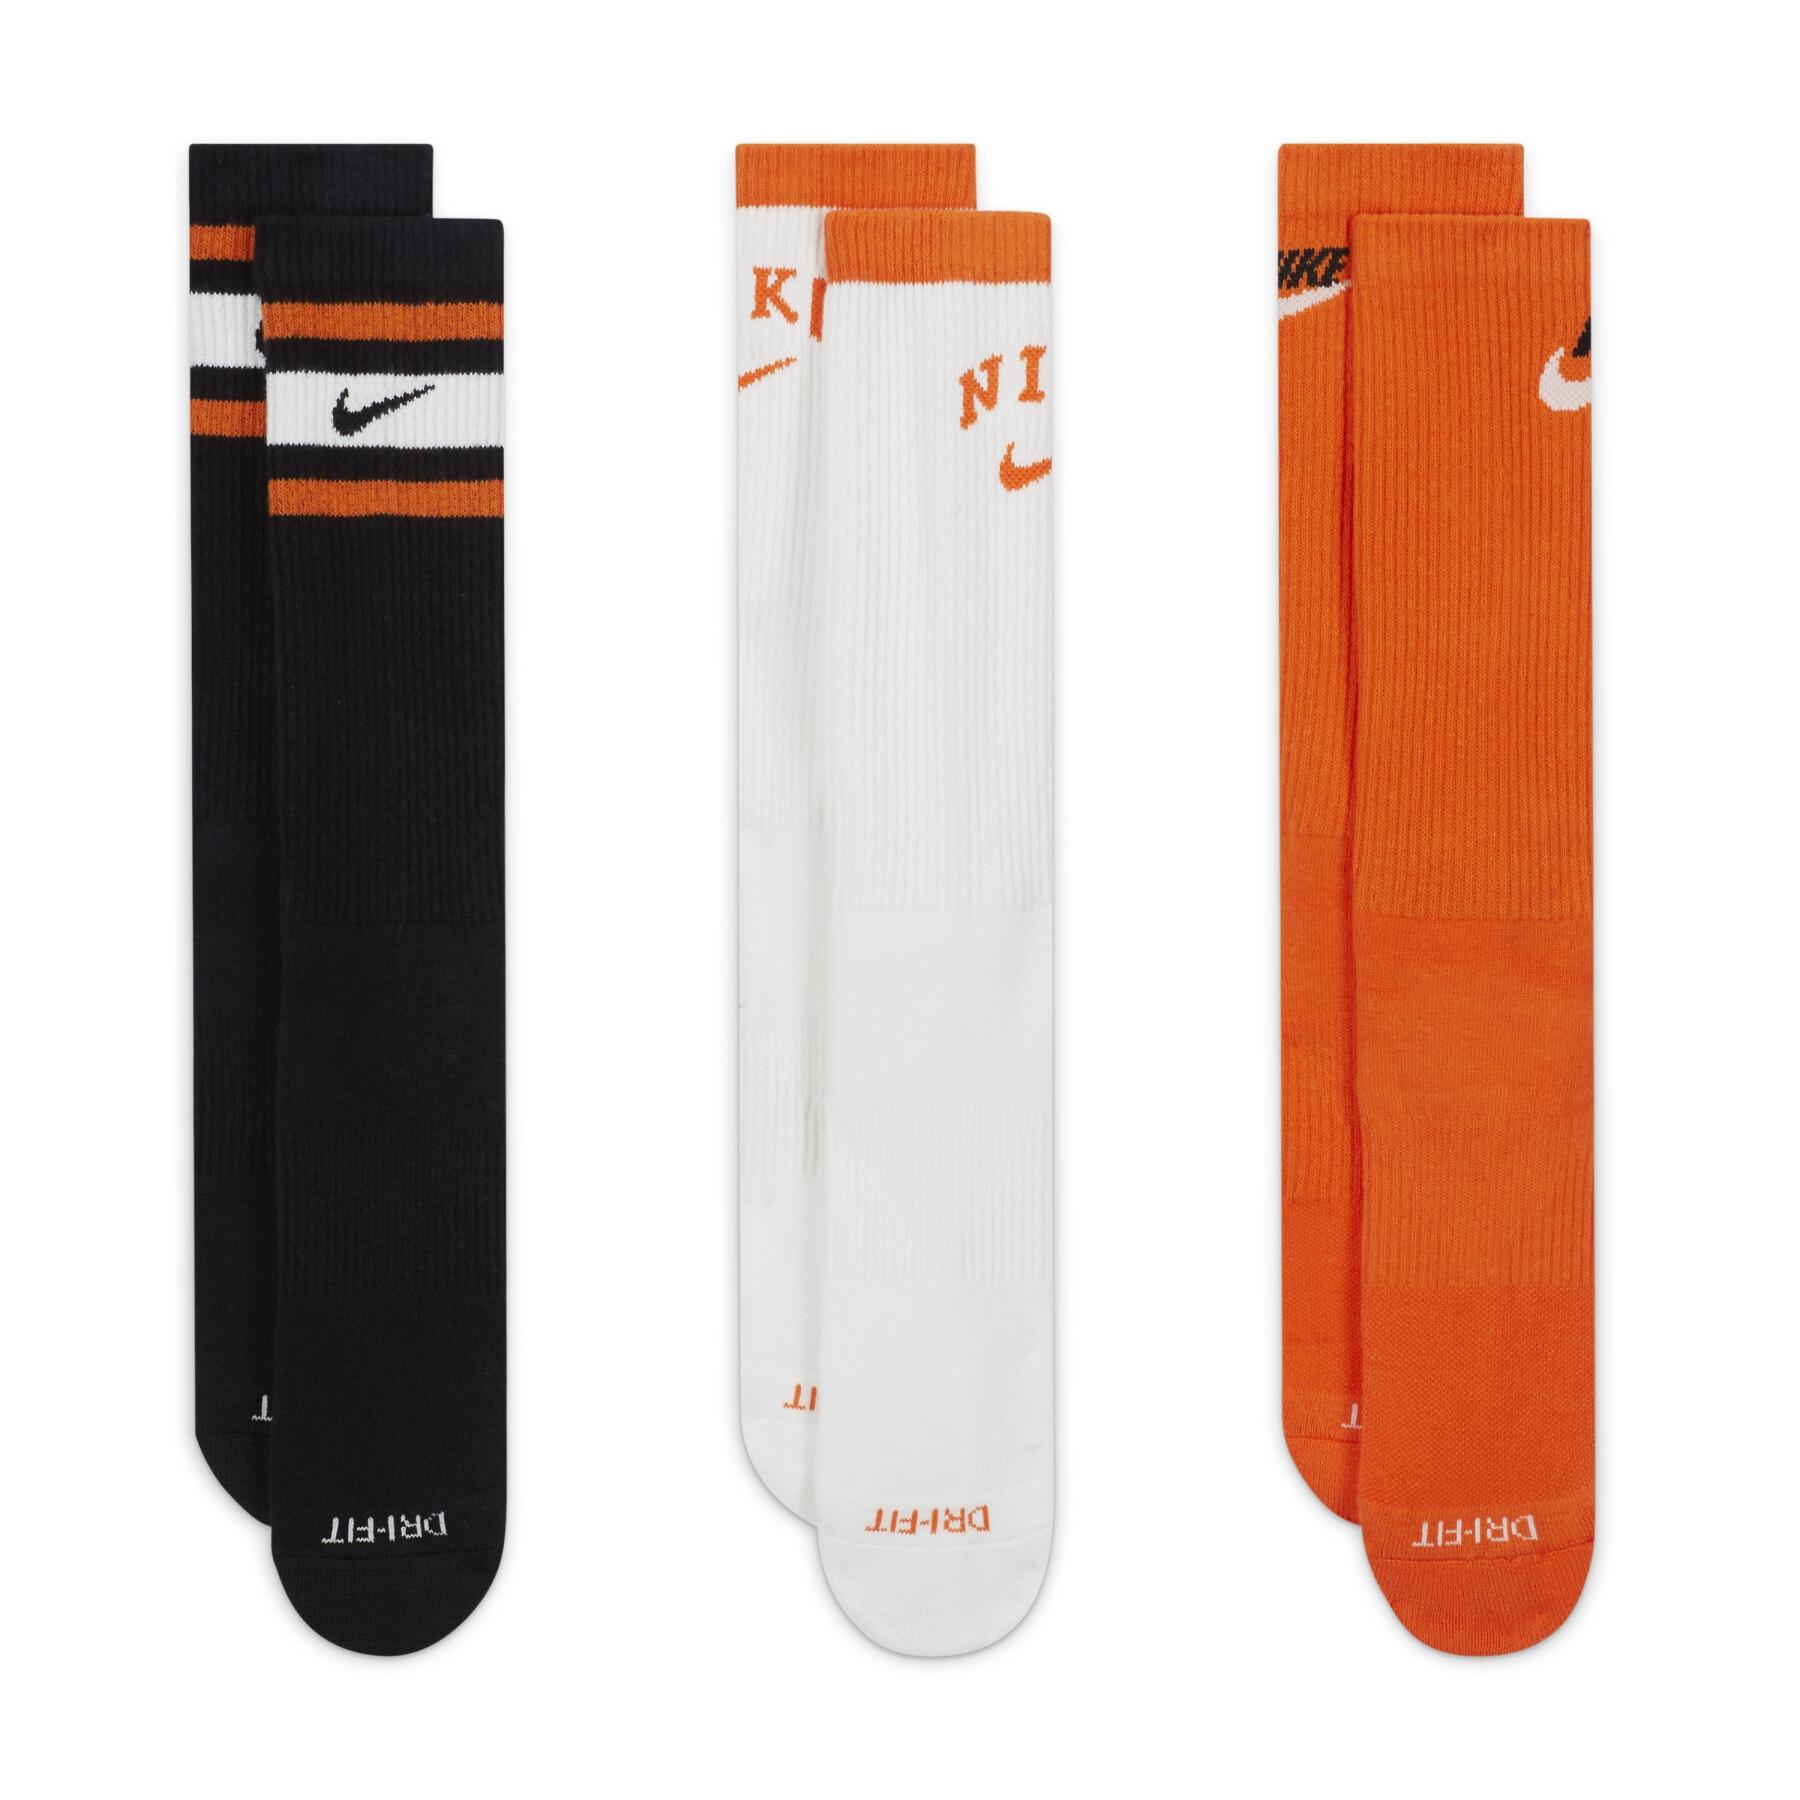 Calcetines Nike Everyday Plus (x6)